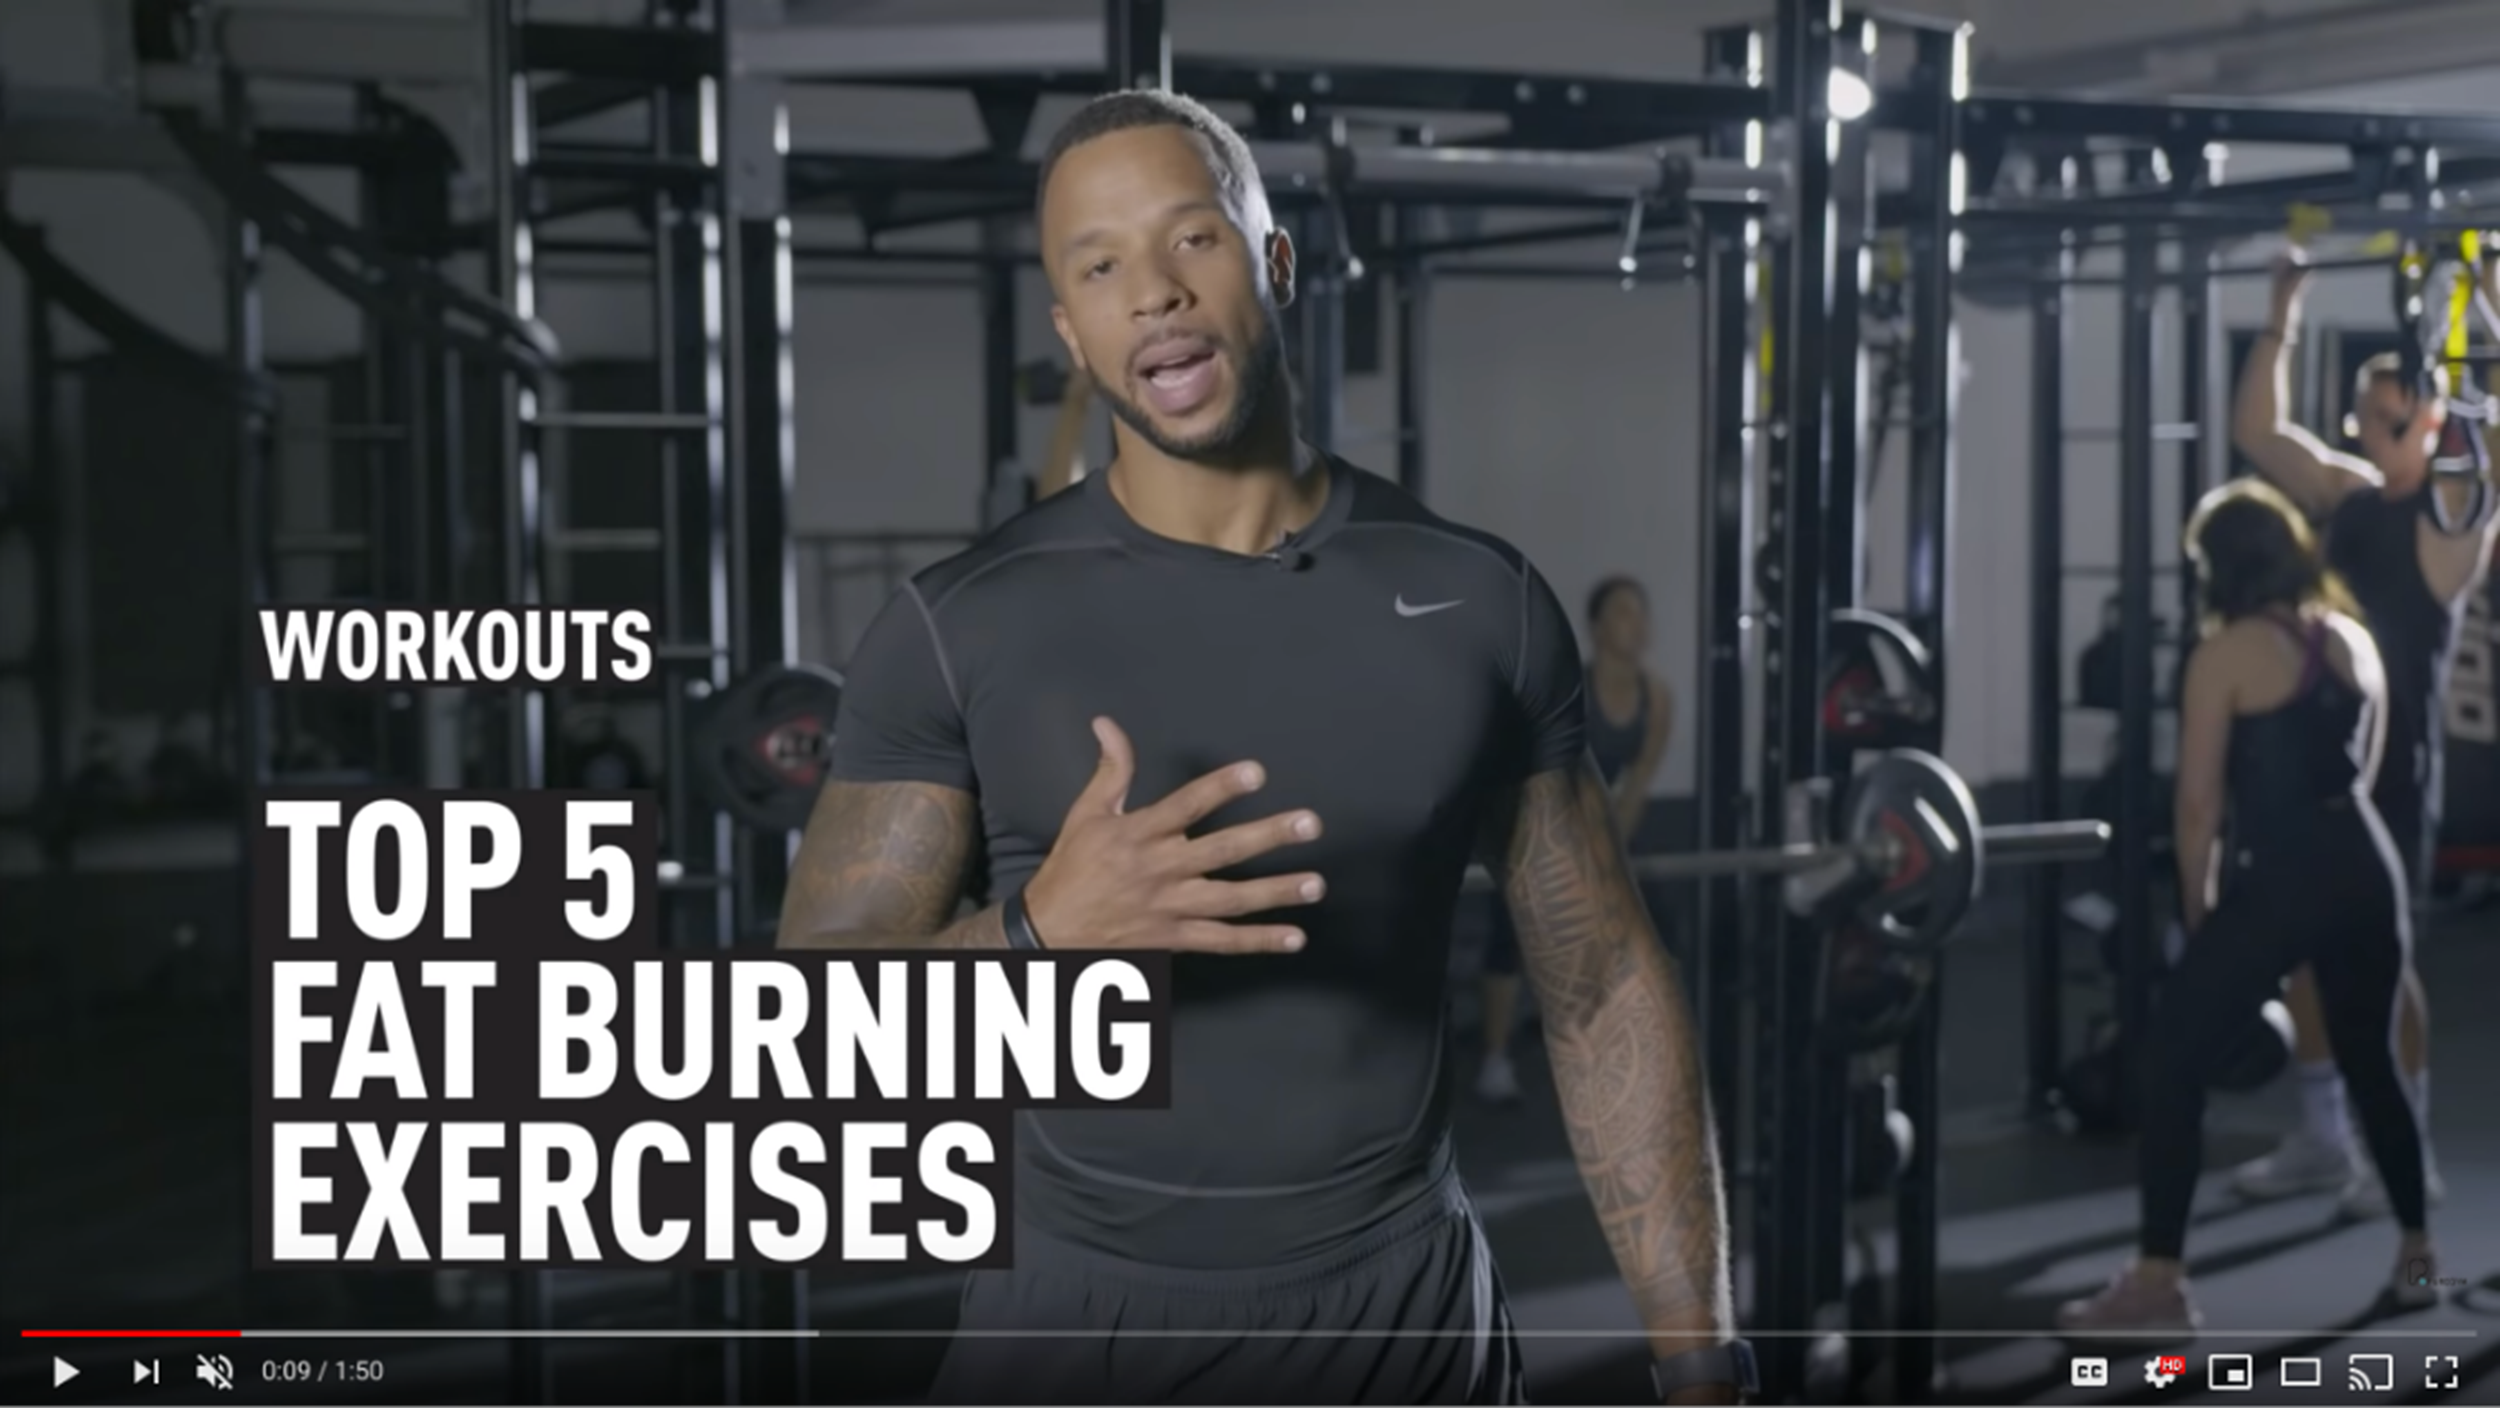 @marcpuregym top 5 fat burning exercises